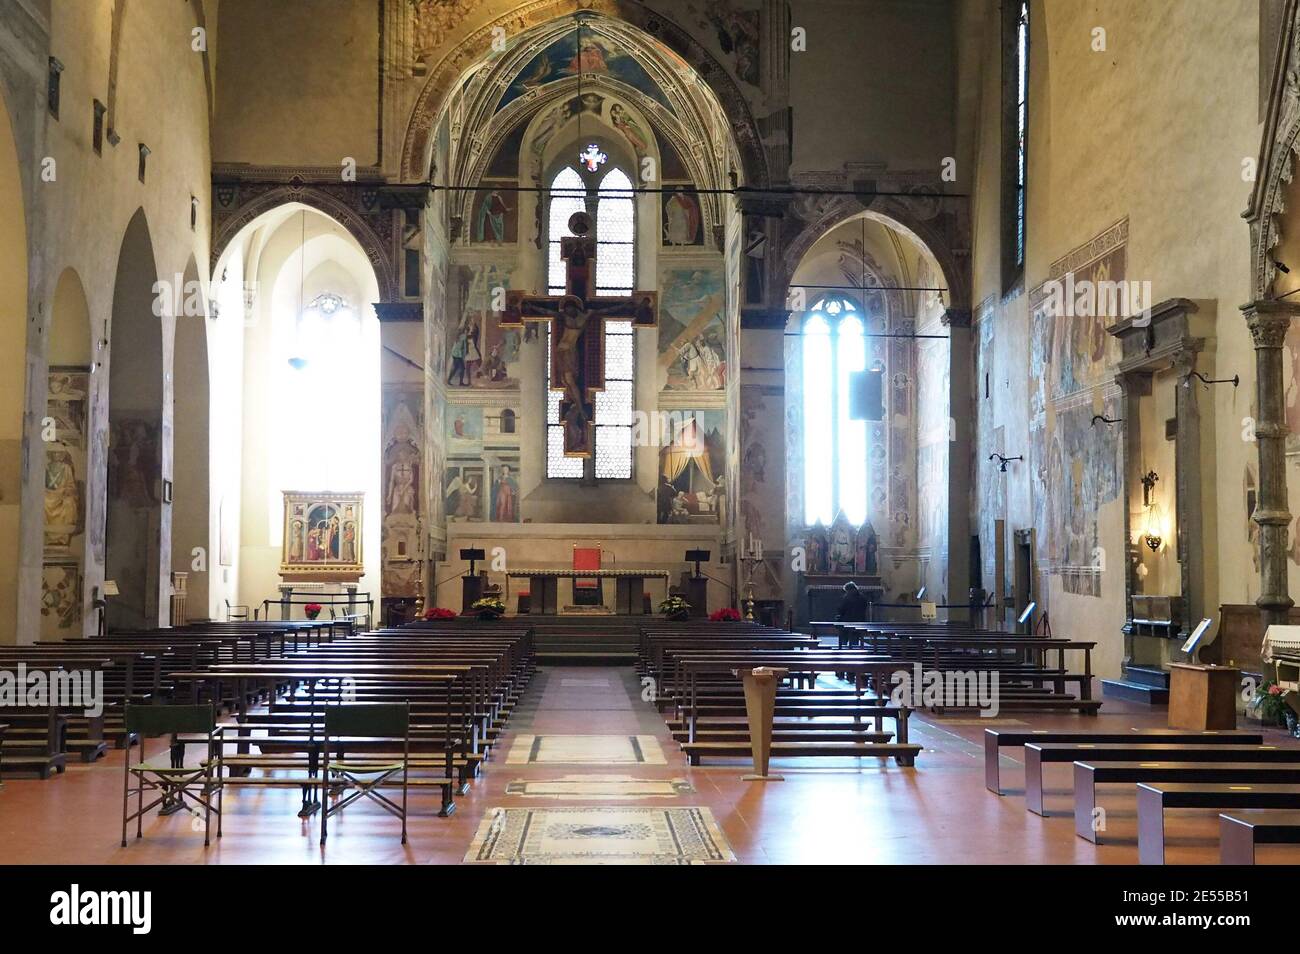 Italy, Tuscany region, Arezzo, January 26, 2021 : Basilica of San Francesco, the frescoes  'The Stories of the True Cross' painted by Piero della Francesca, today reopening after the closure due the covid-19 pandemic.    Photo © Daiano Cristini/Sintesi/Alamy Live News Stock Photo